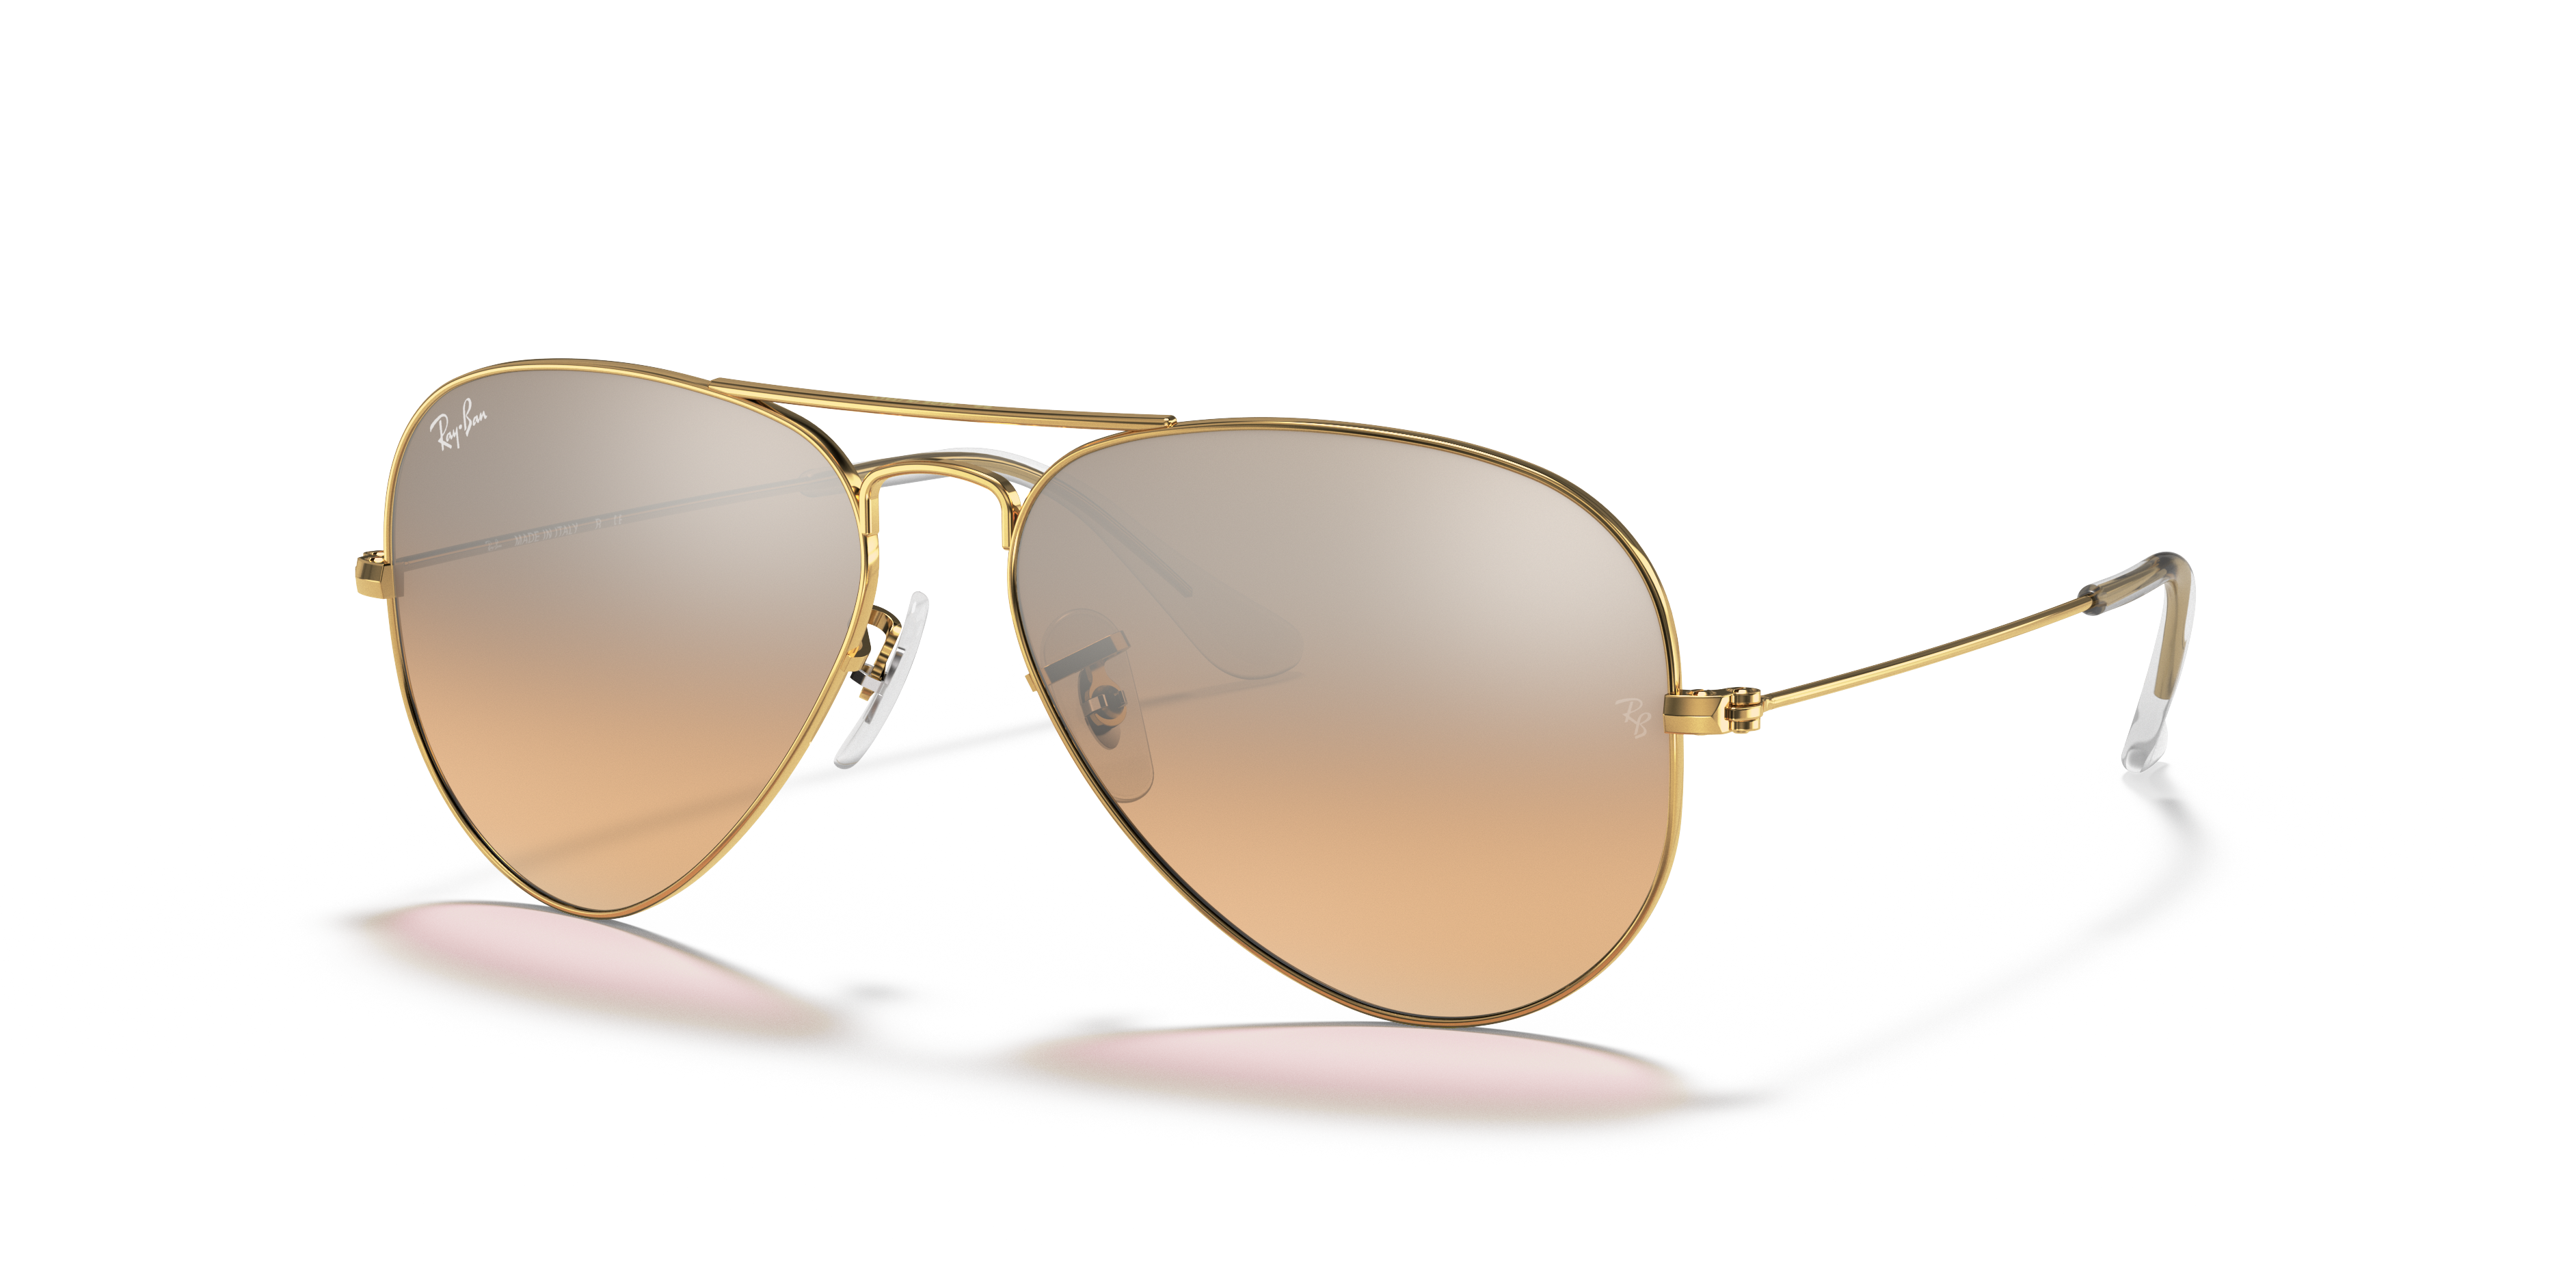 Ray-Ban Sunglasses in Silver Pink Womens Sunglasses Ray-Ban Sunglasses 